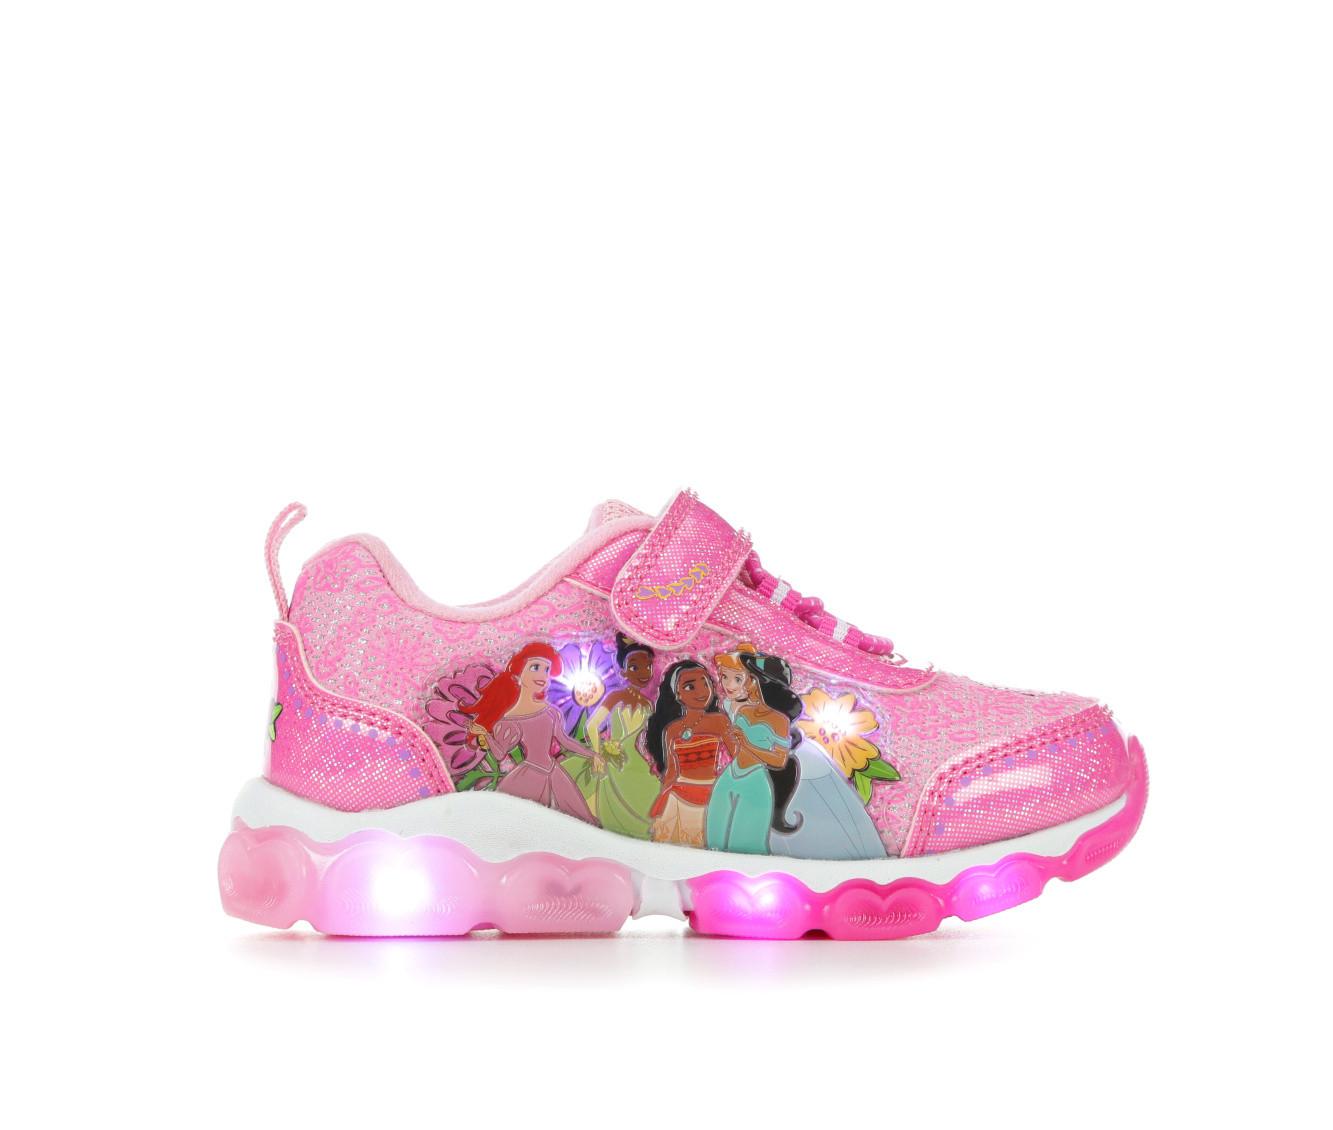 Girl Sneakers with Lights